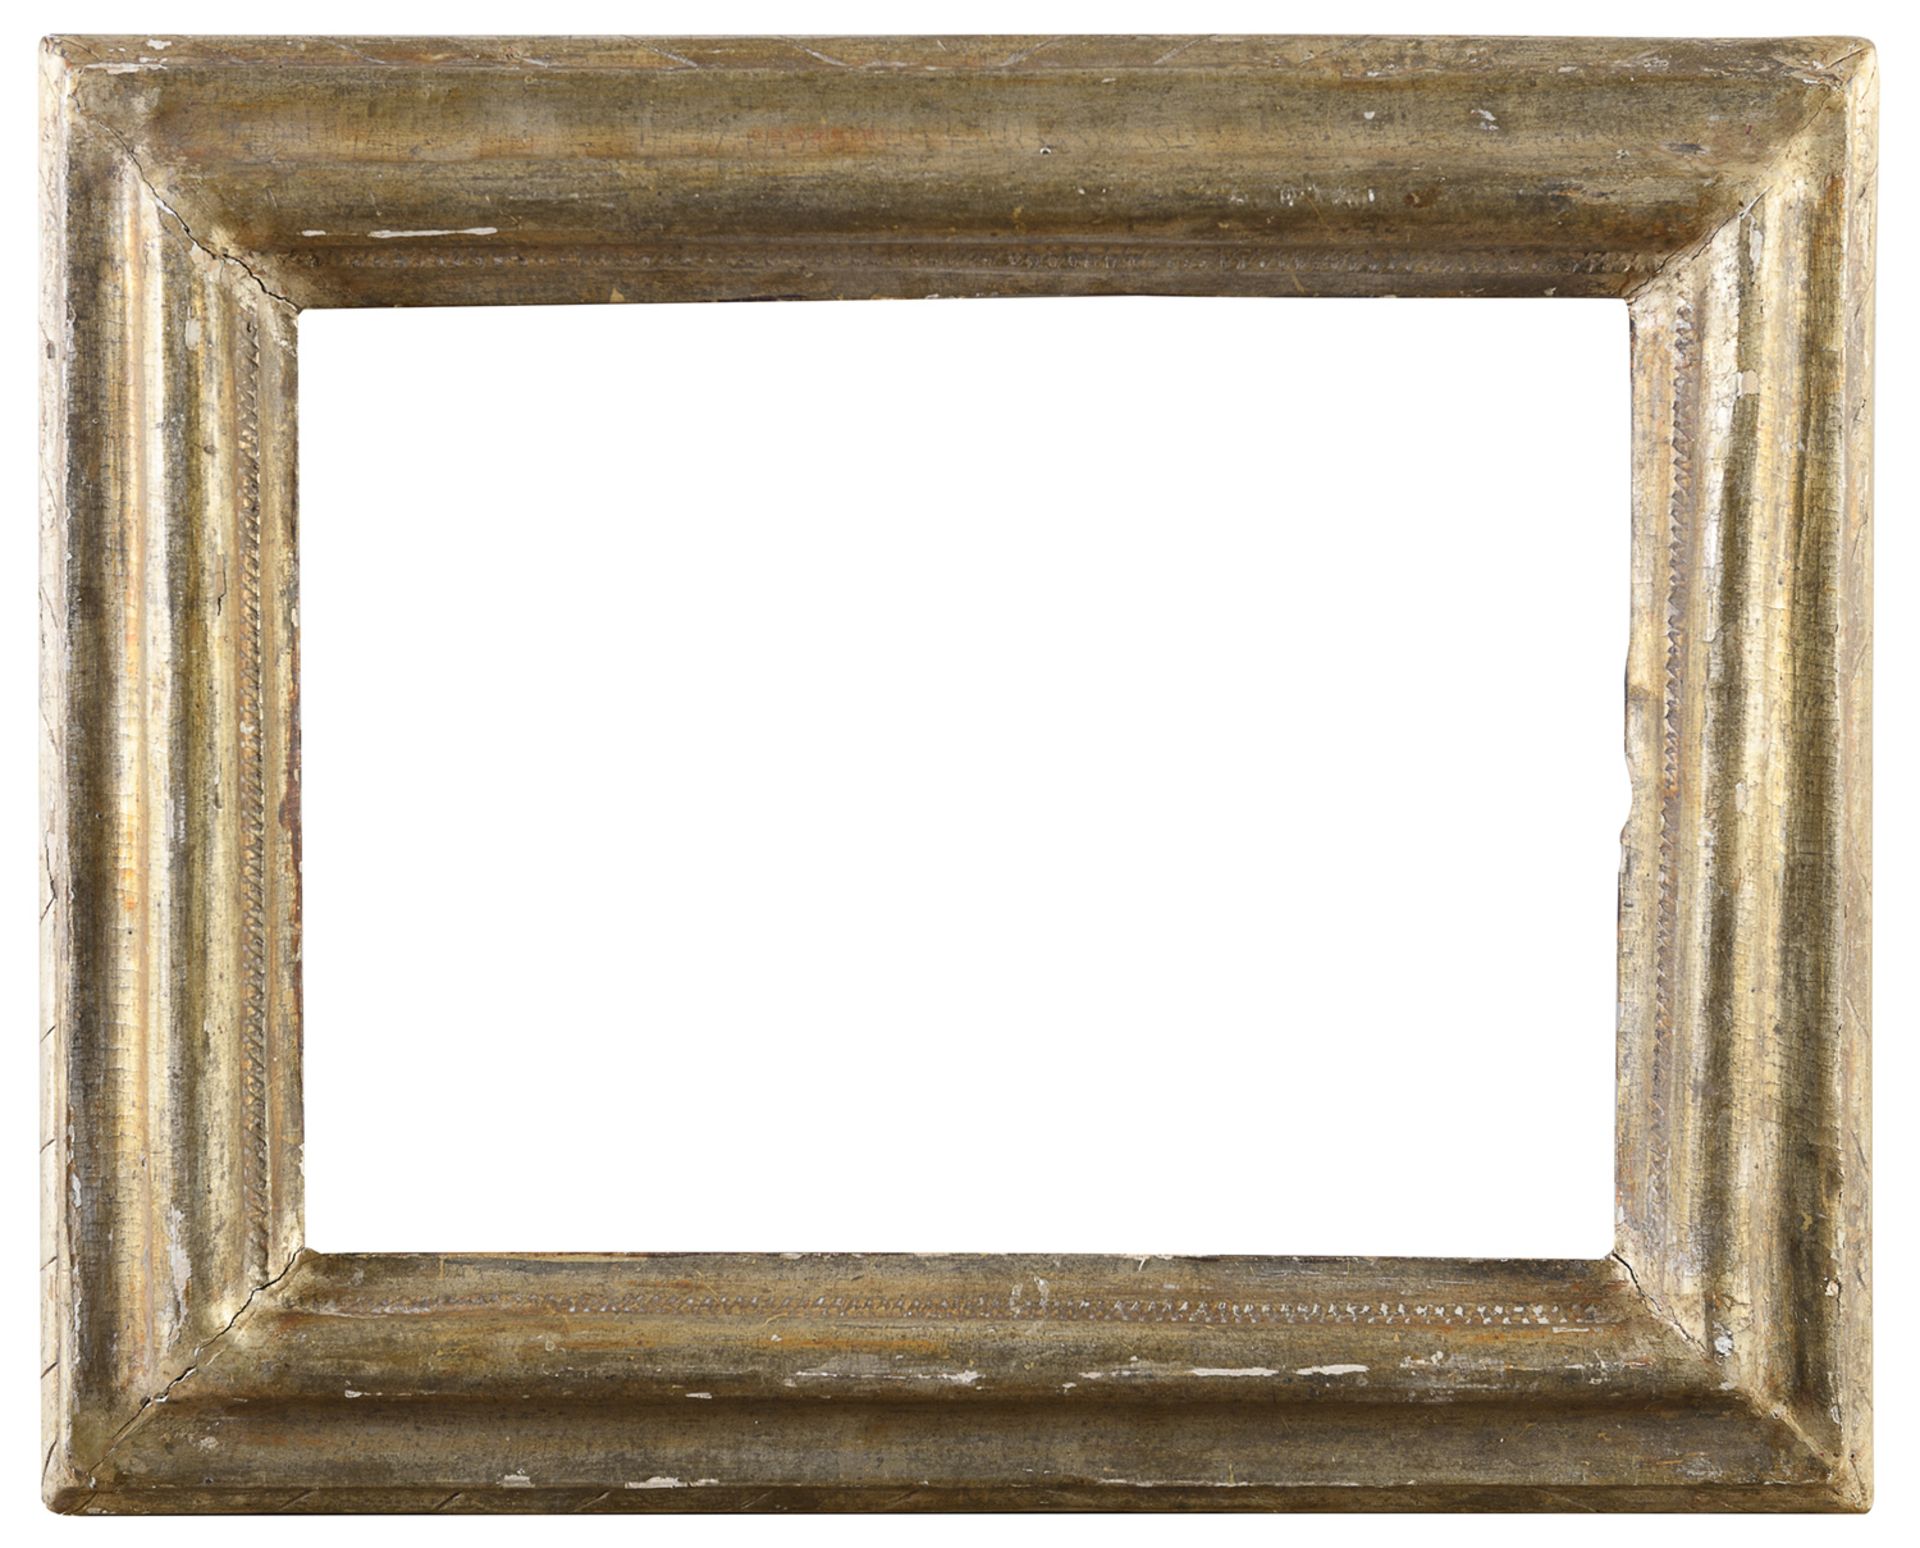 FRAME IN GILTWOOD